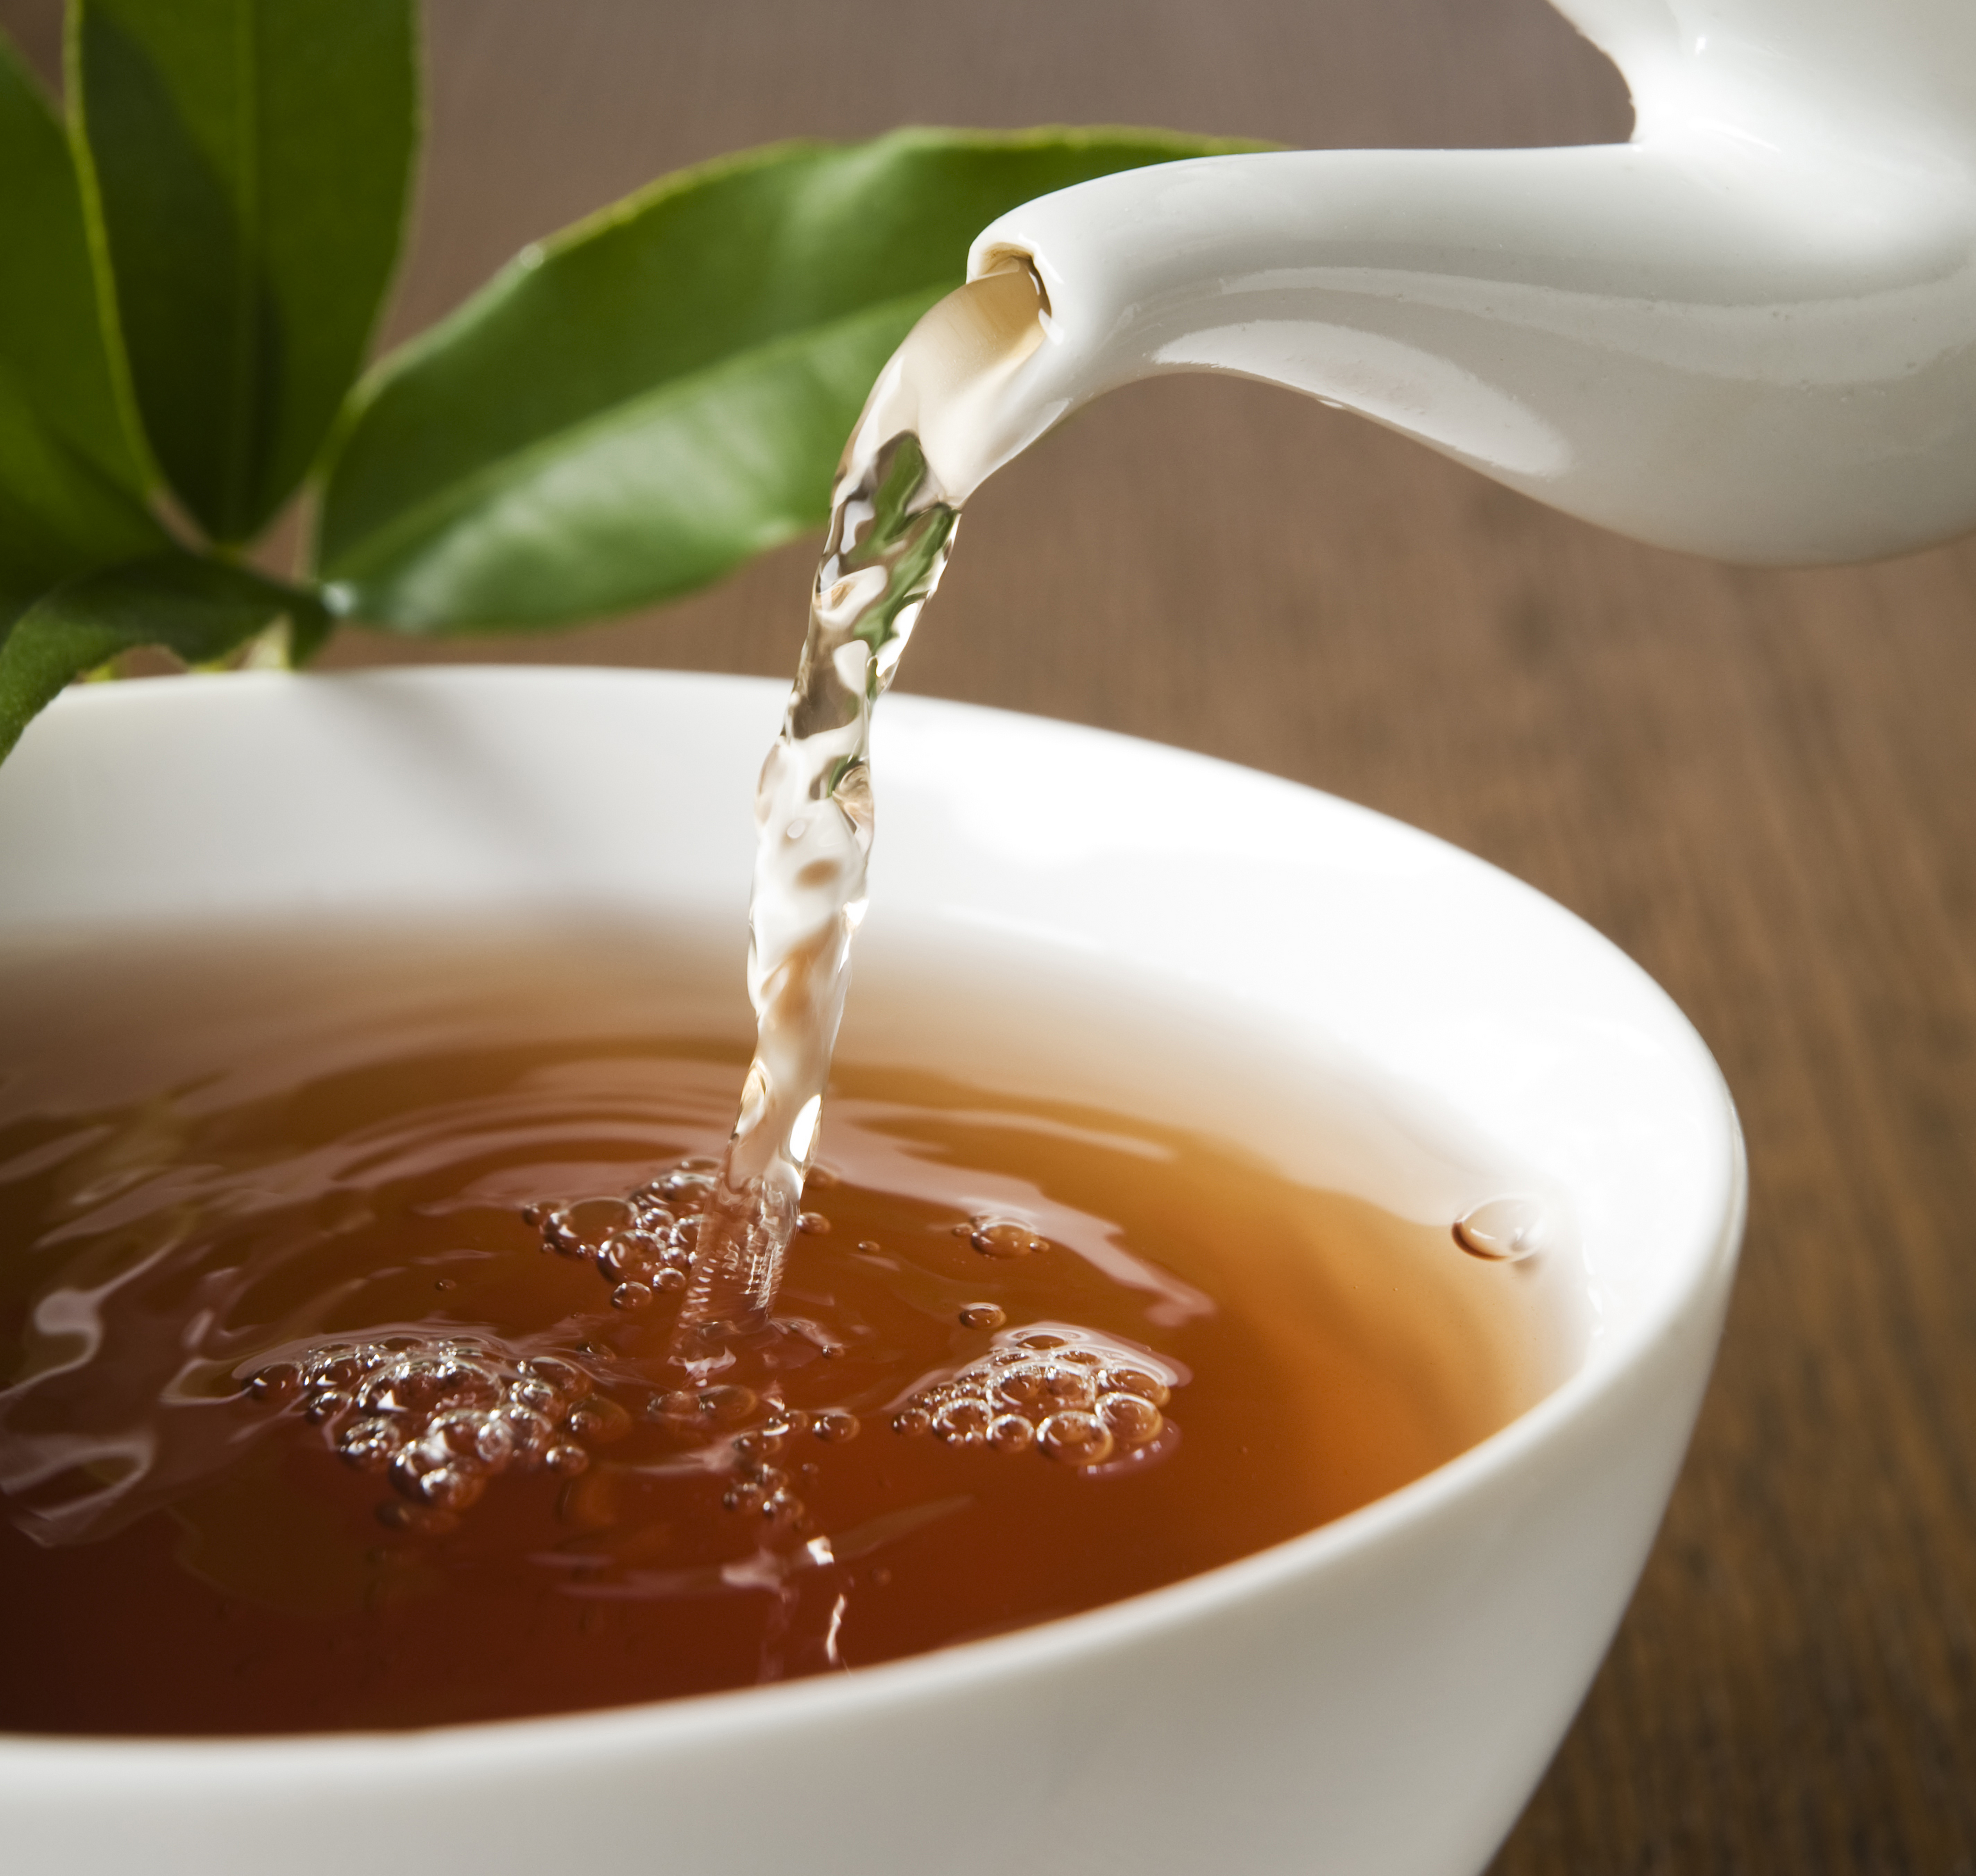 6-Reasons-To-Drink-Tea-Every-Day-1  